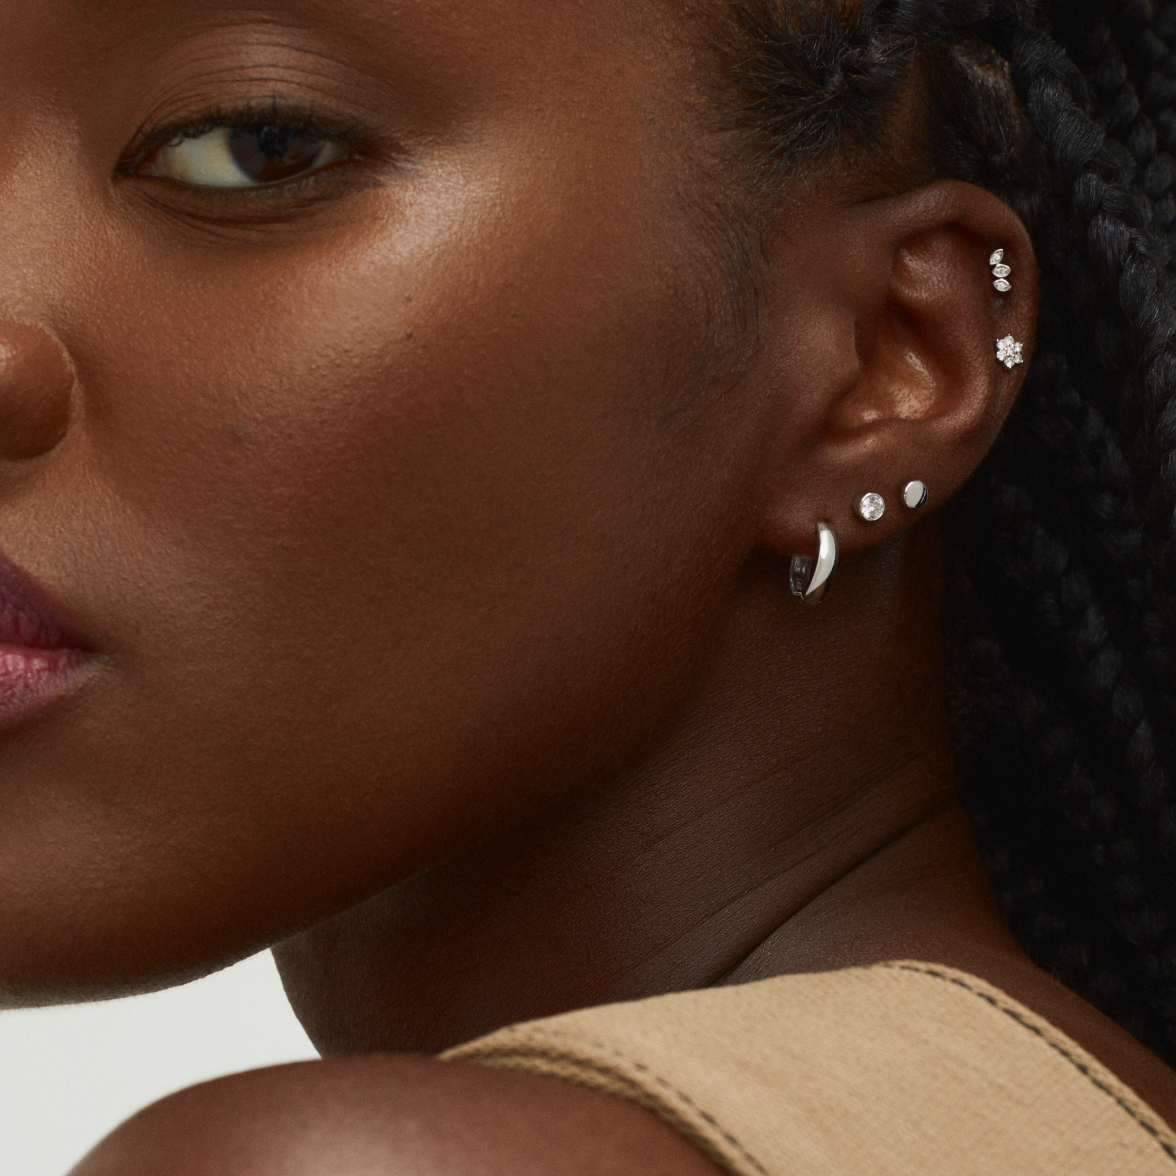 5 Ear Stacks Perfect For Any Piercing Style